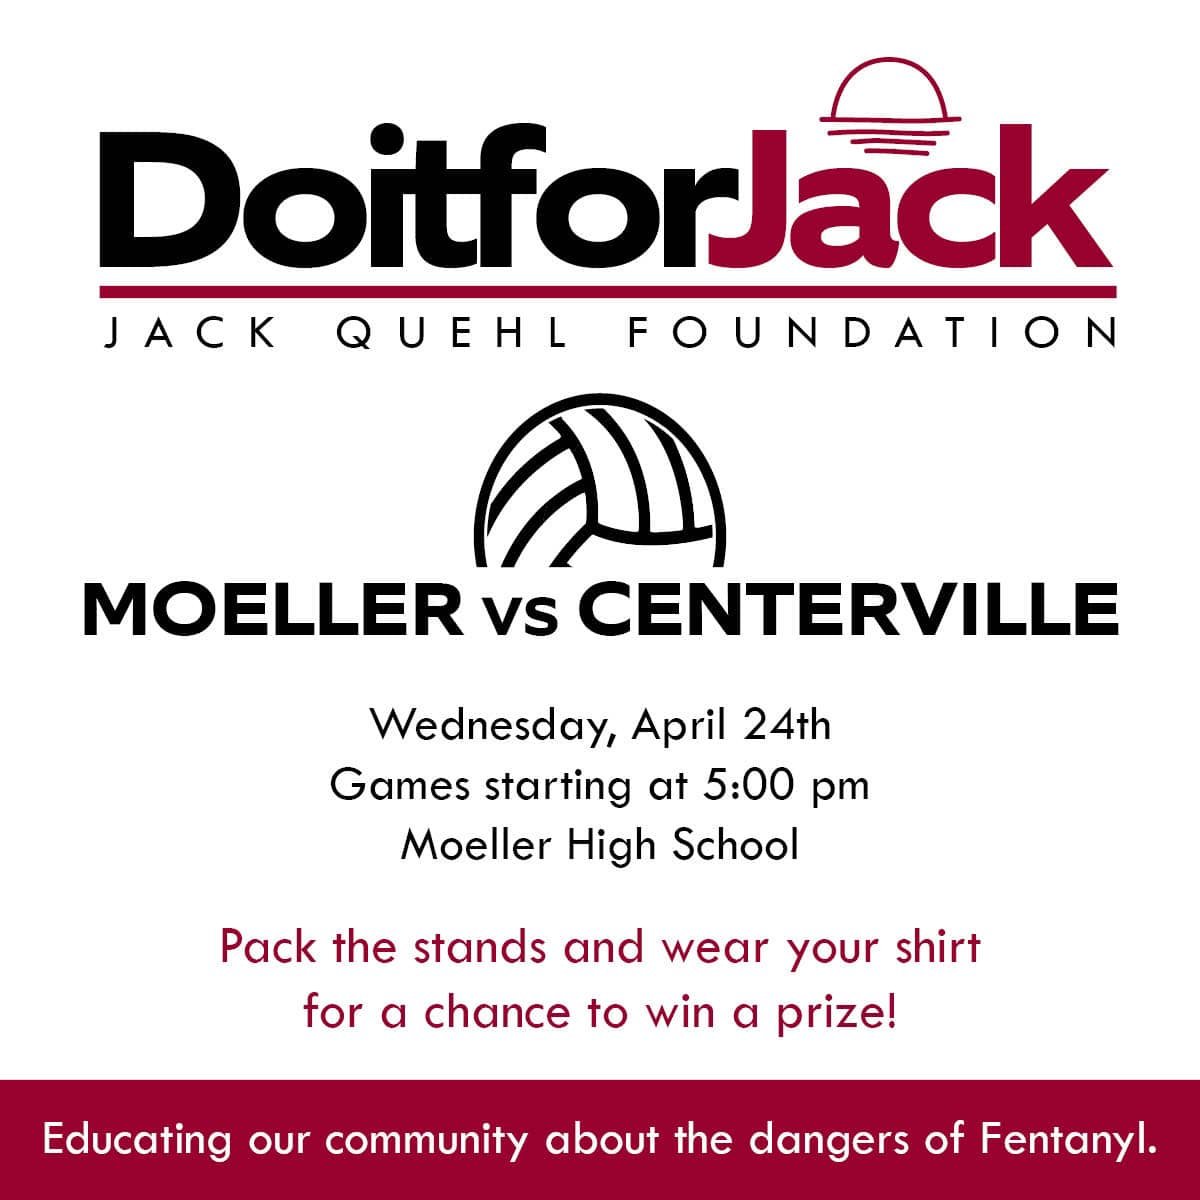 DOITFORJACK Night is back! Come watch some awesome volleyball and support our mission. The Student Run Business will be selling the navy with white shirts on Tuesday morning  in the lobby for $15. Everyone who shows up in a DIFJ shirt (any of our shi